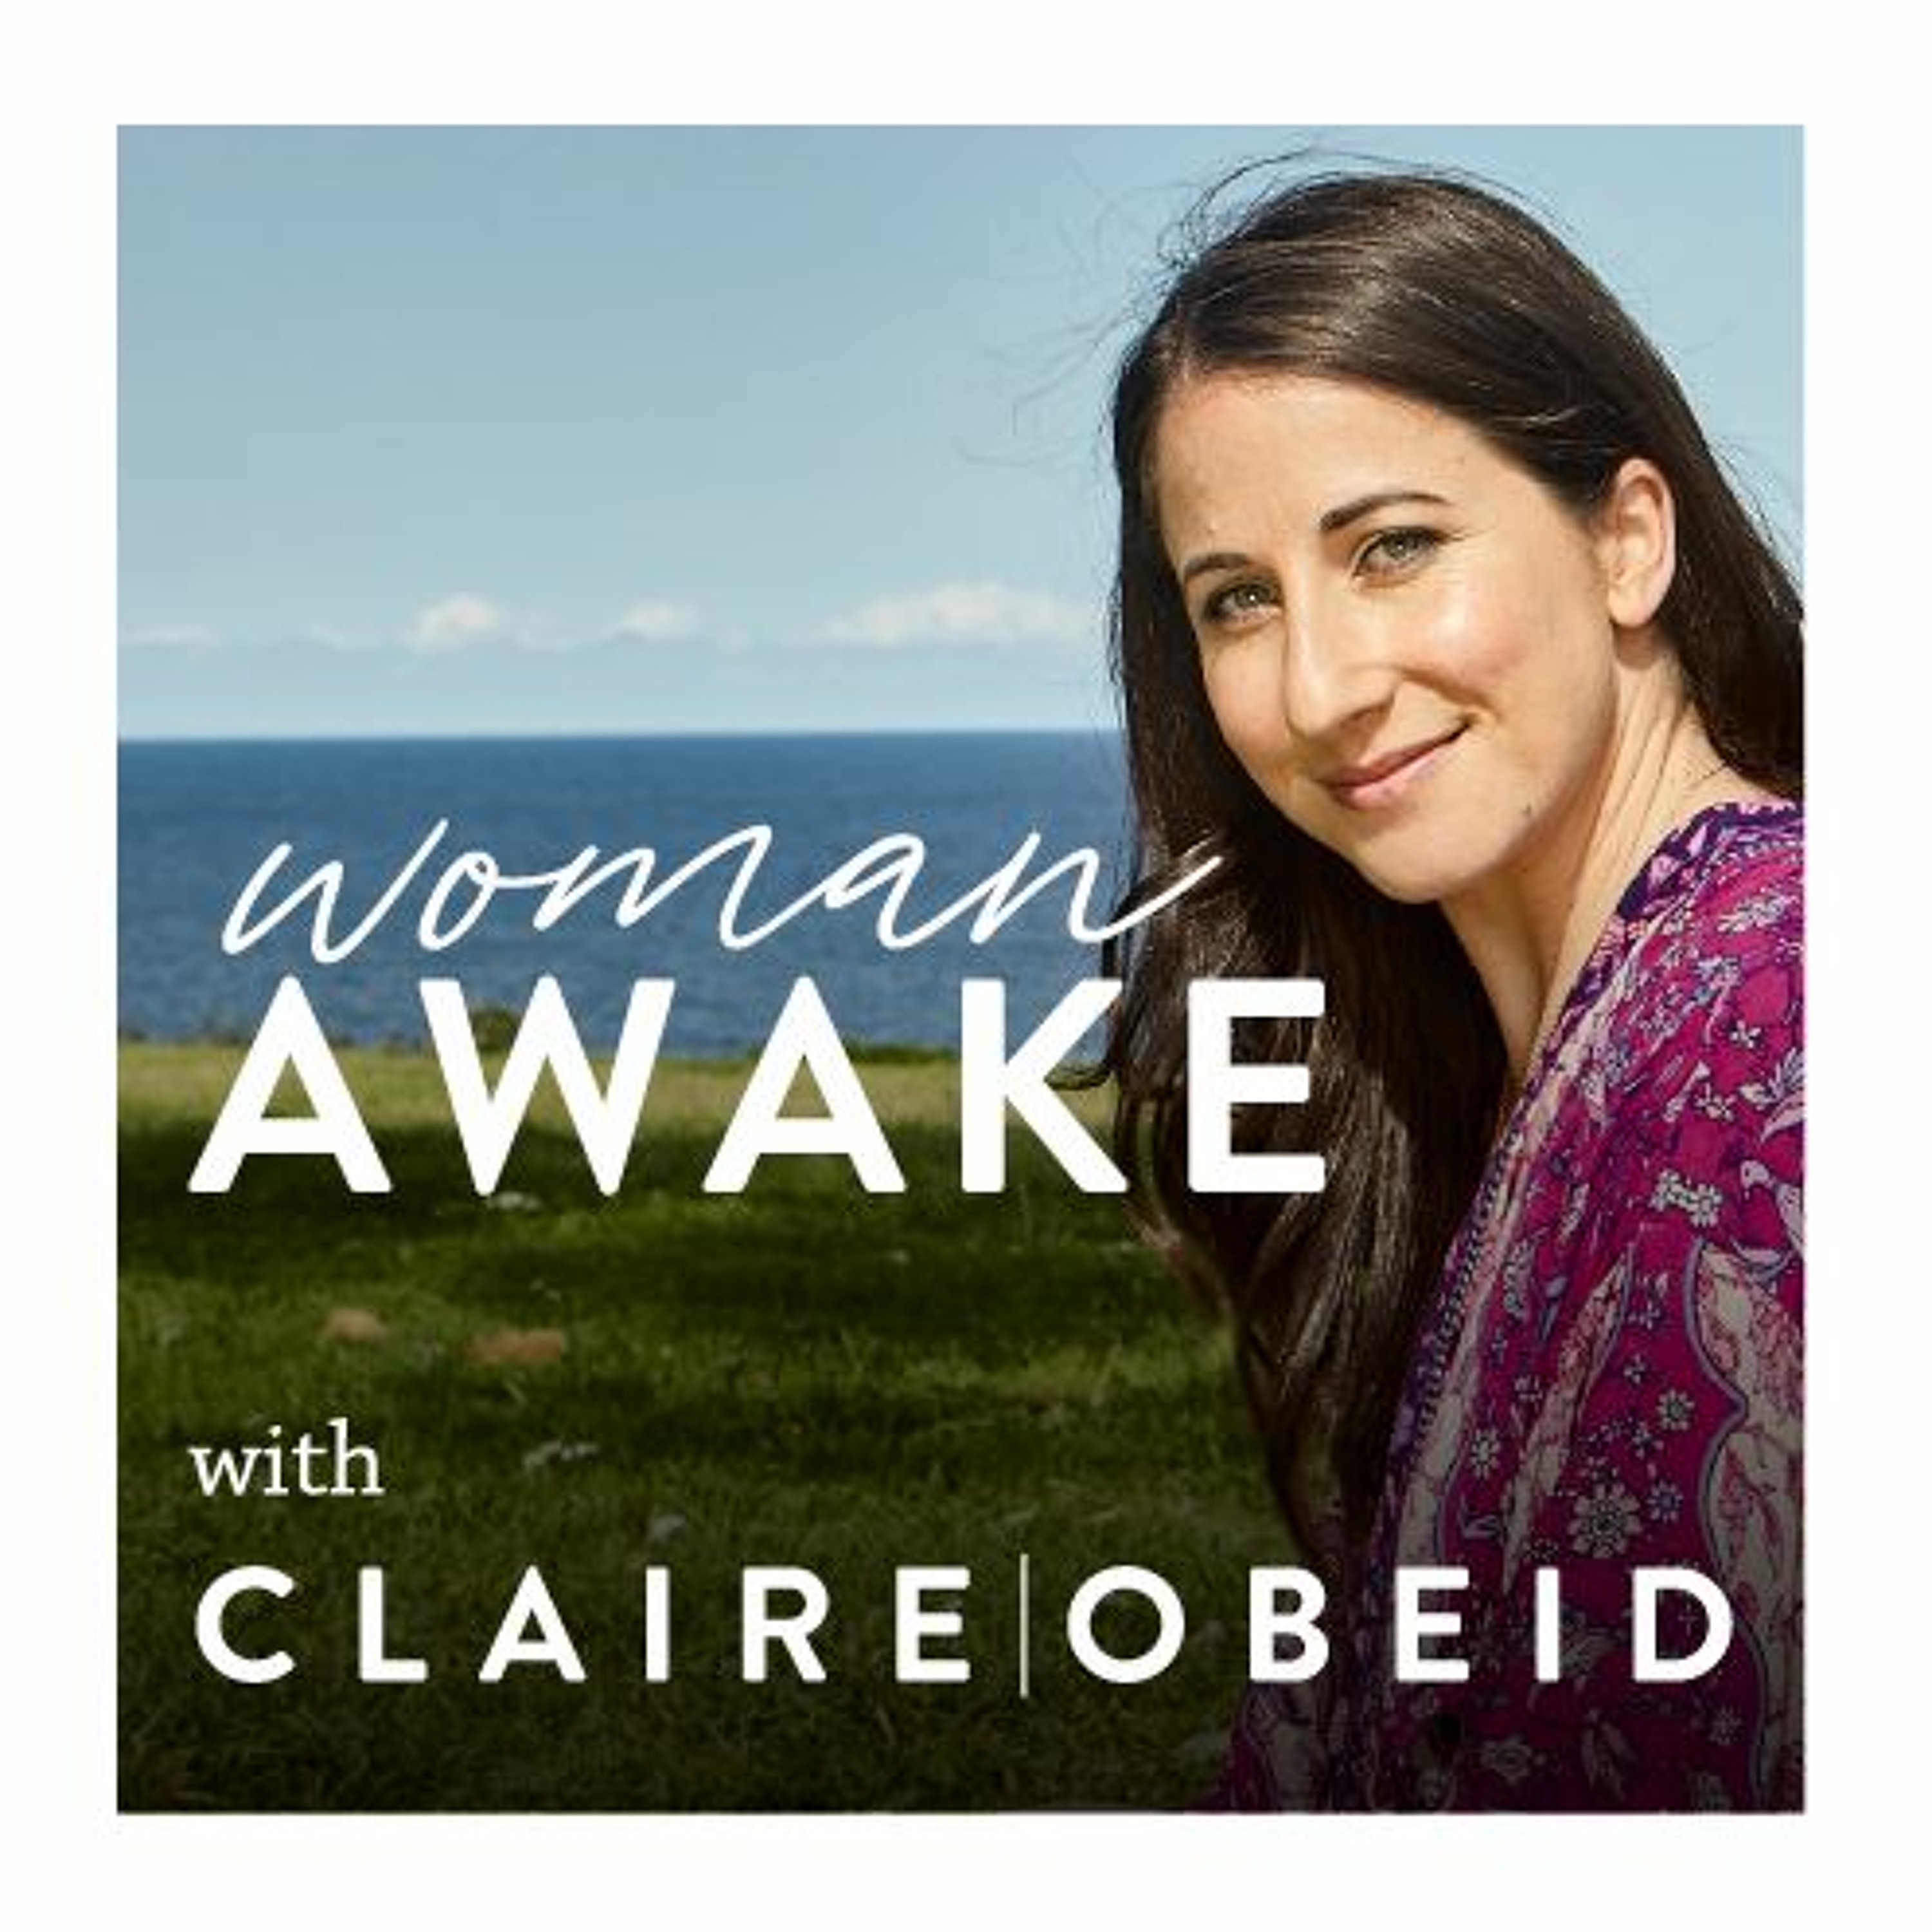 Woman Awake - Episode 113 - You Get Me Plus Safety (And An Invitation)